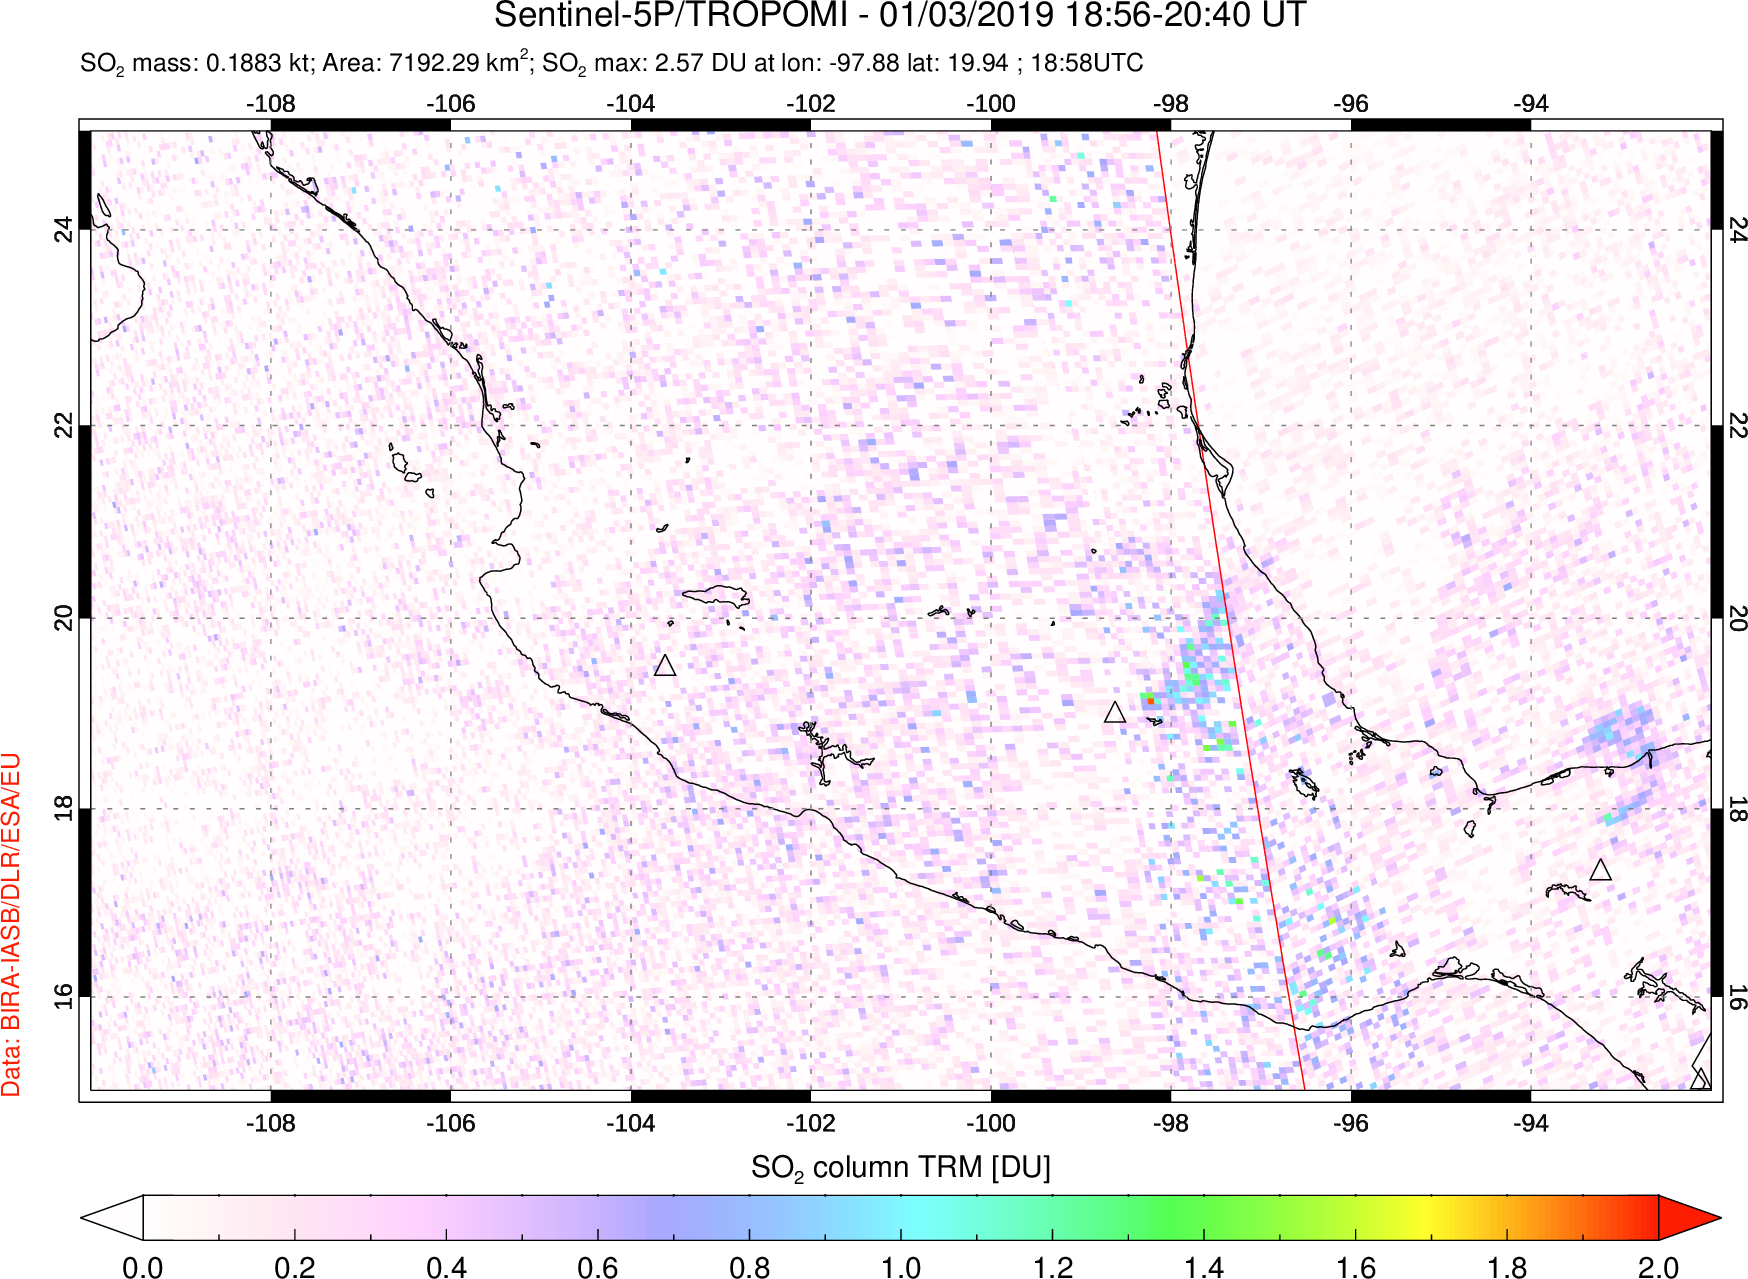 A sulfur dioxide image over Mexico on Jan 03, 2019.